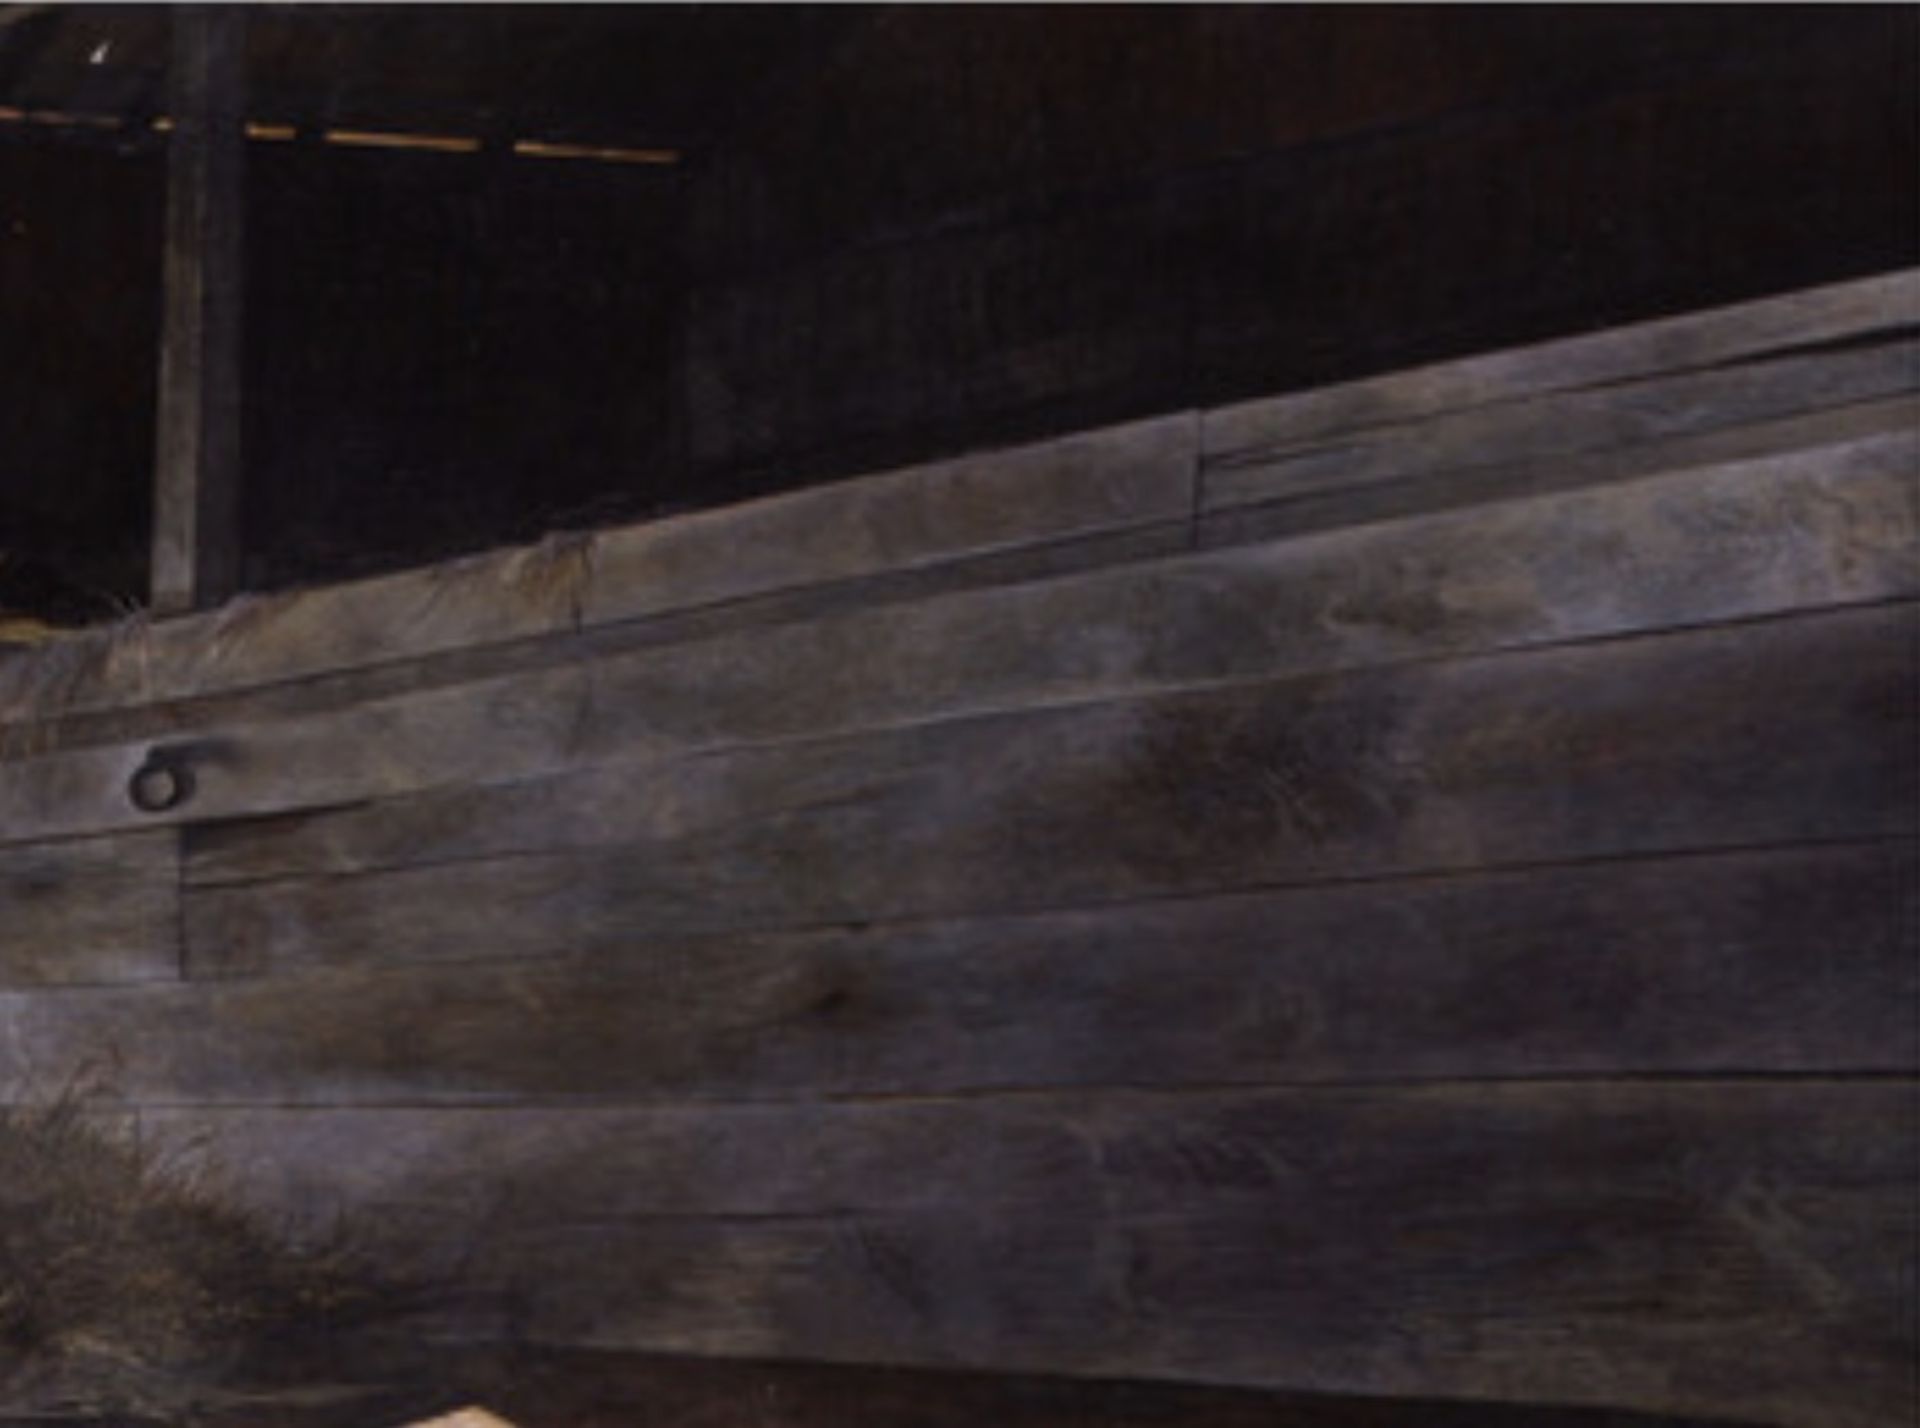 Andrew Wyeth "McVeys Barn, 1948" Offset Lithograph - Image 2 of 5